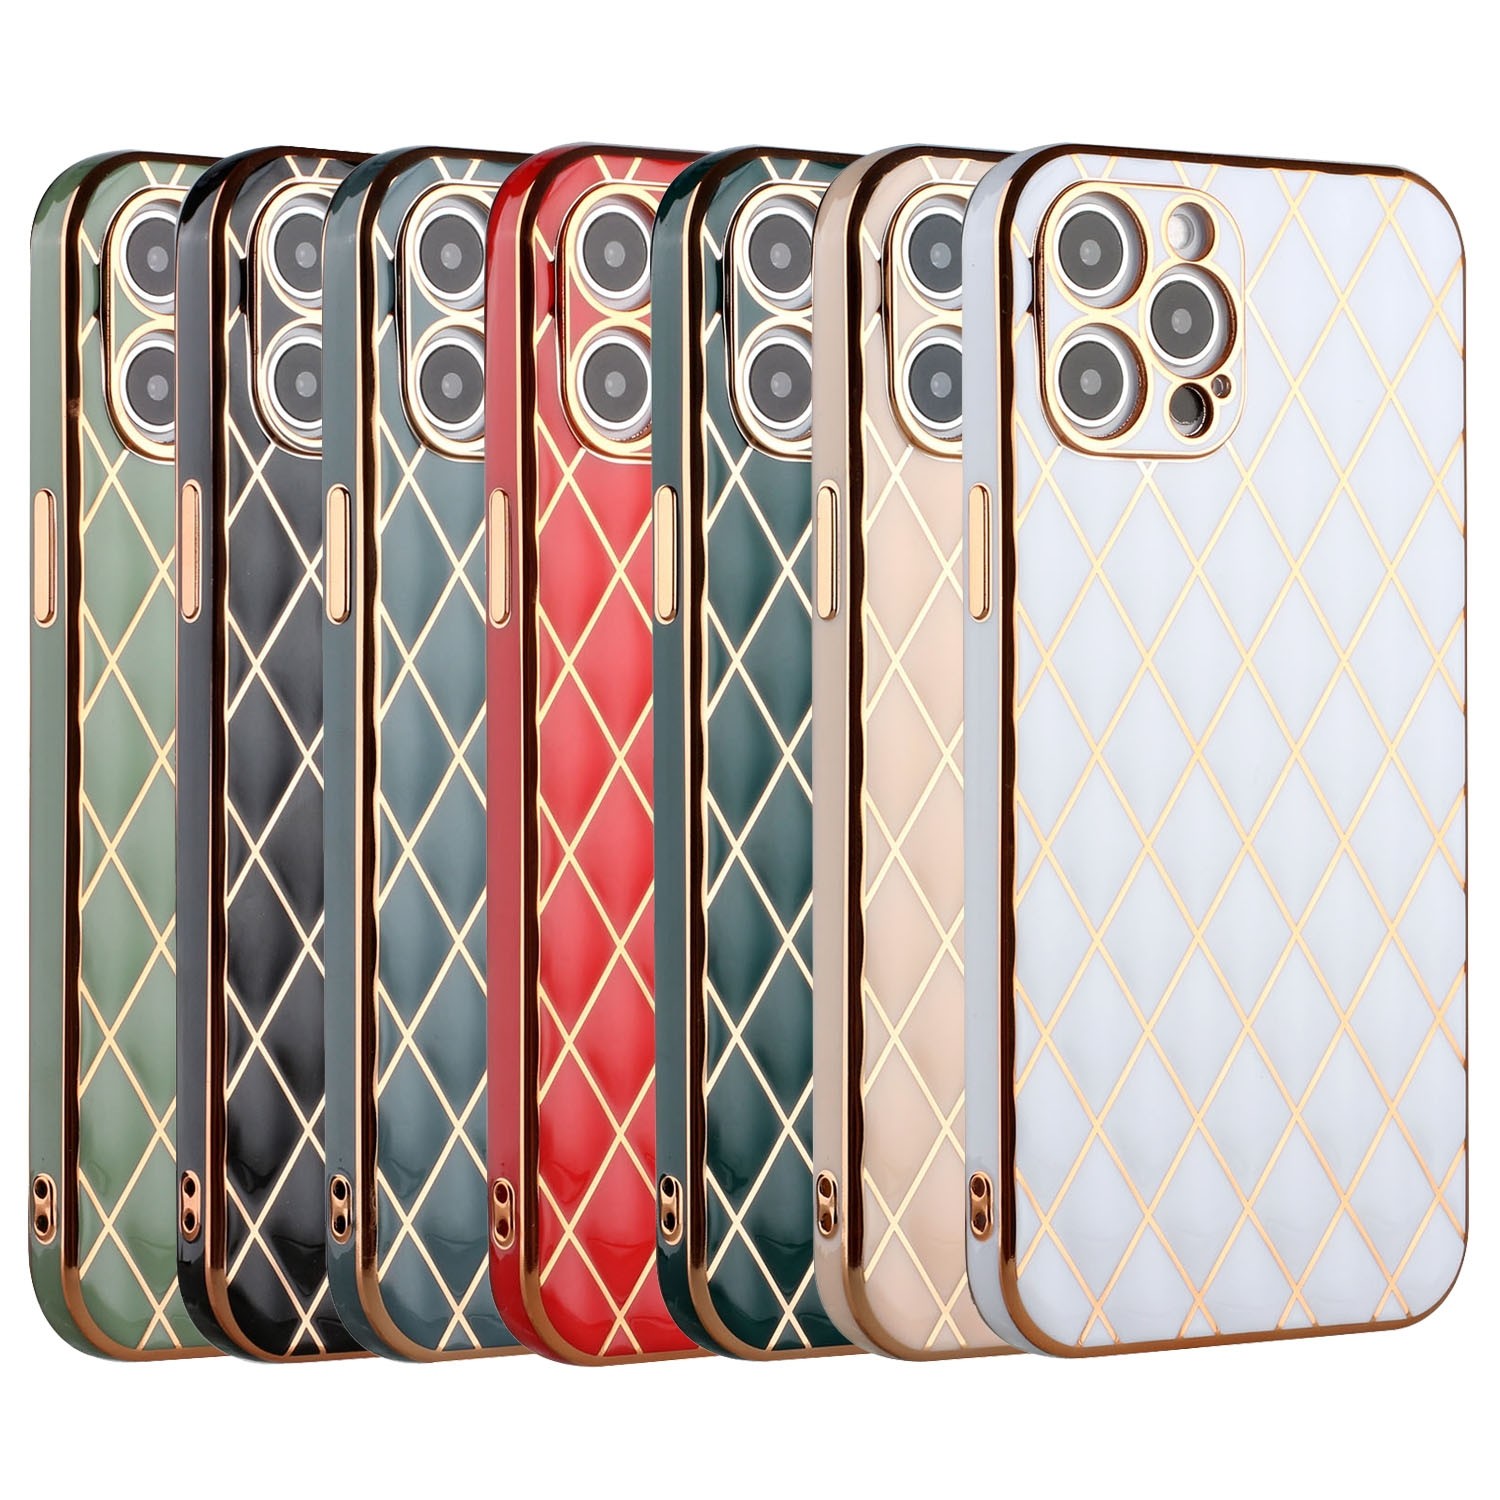 Electroplated Rhombic Pattern Sheepskin TPU Protective Case For iPhone 12 Pro Max (Dark Green)